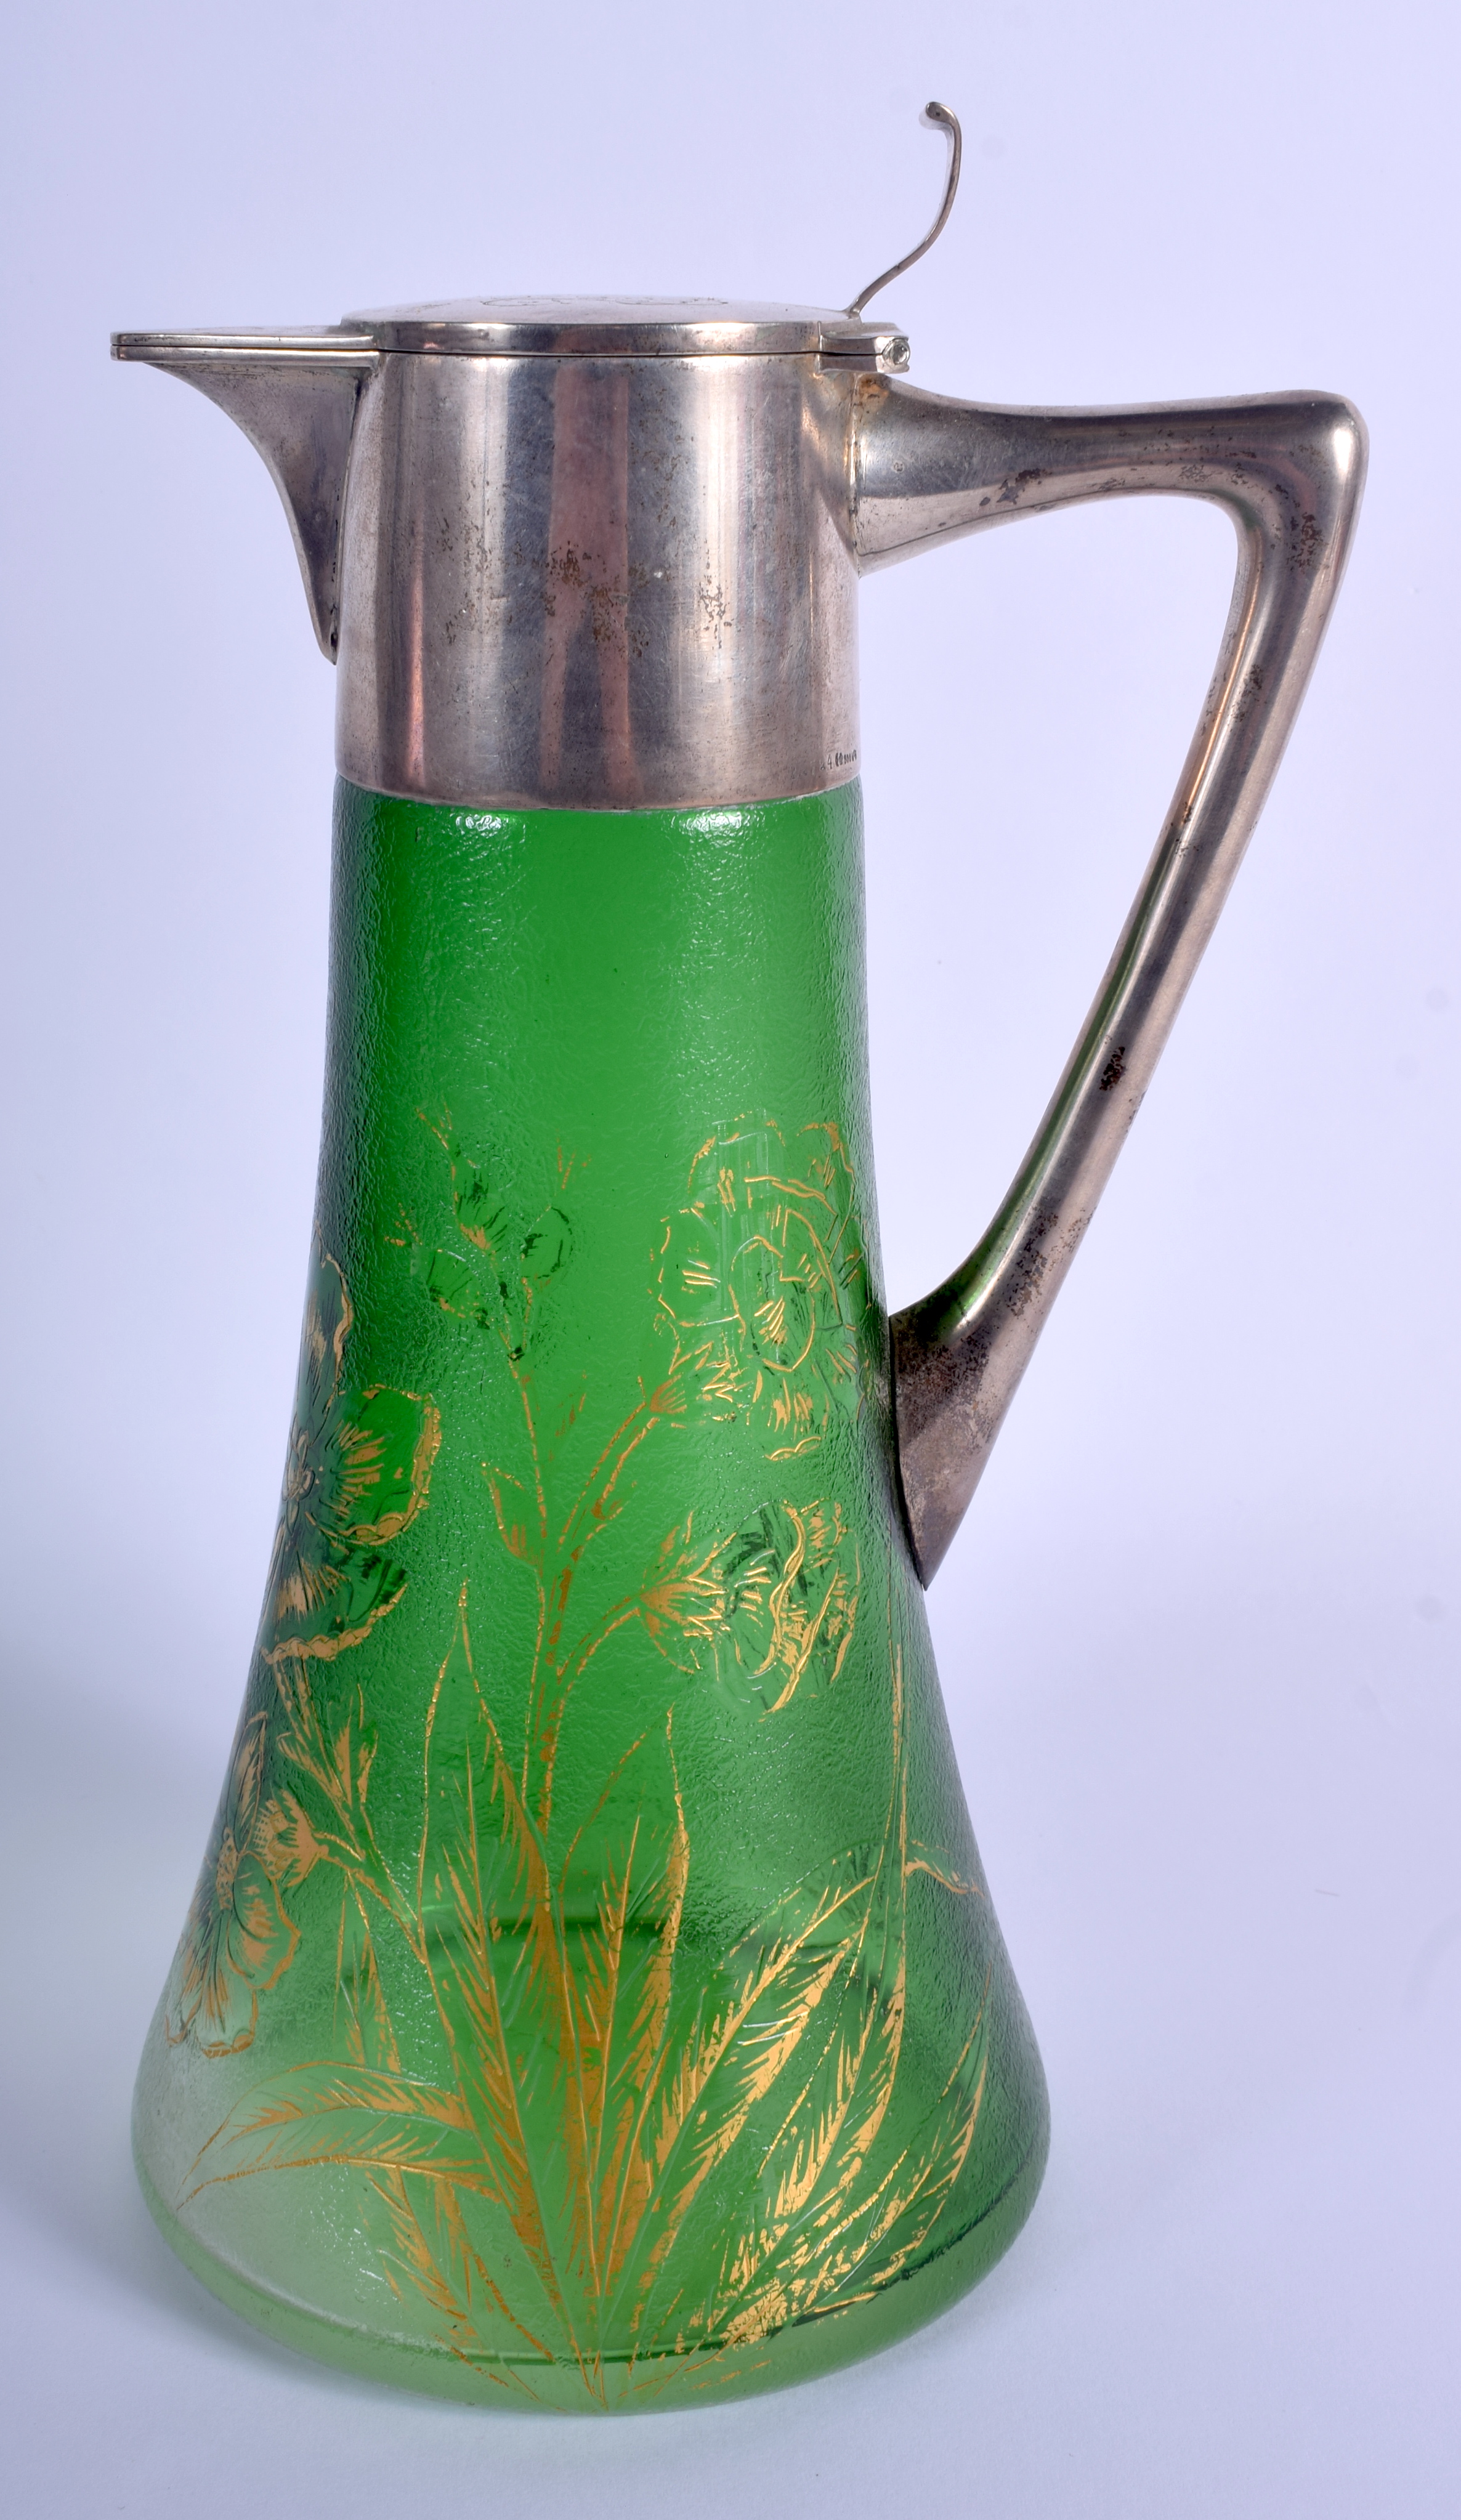 A LARGE ART NOUVEAU SILVER MOUNTED GREEN GLASS CLARET JUG painted with gilt flowers. 28 cm high.